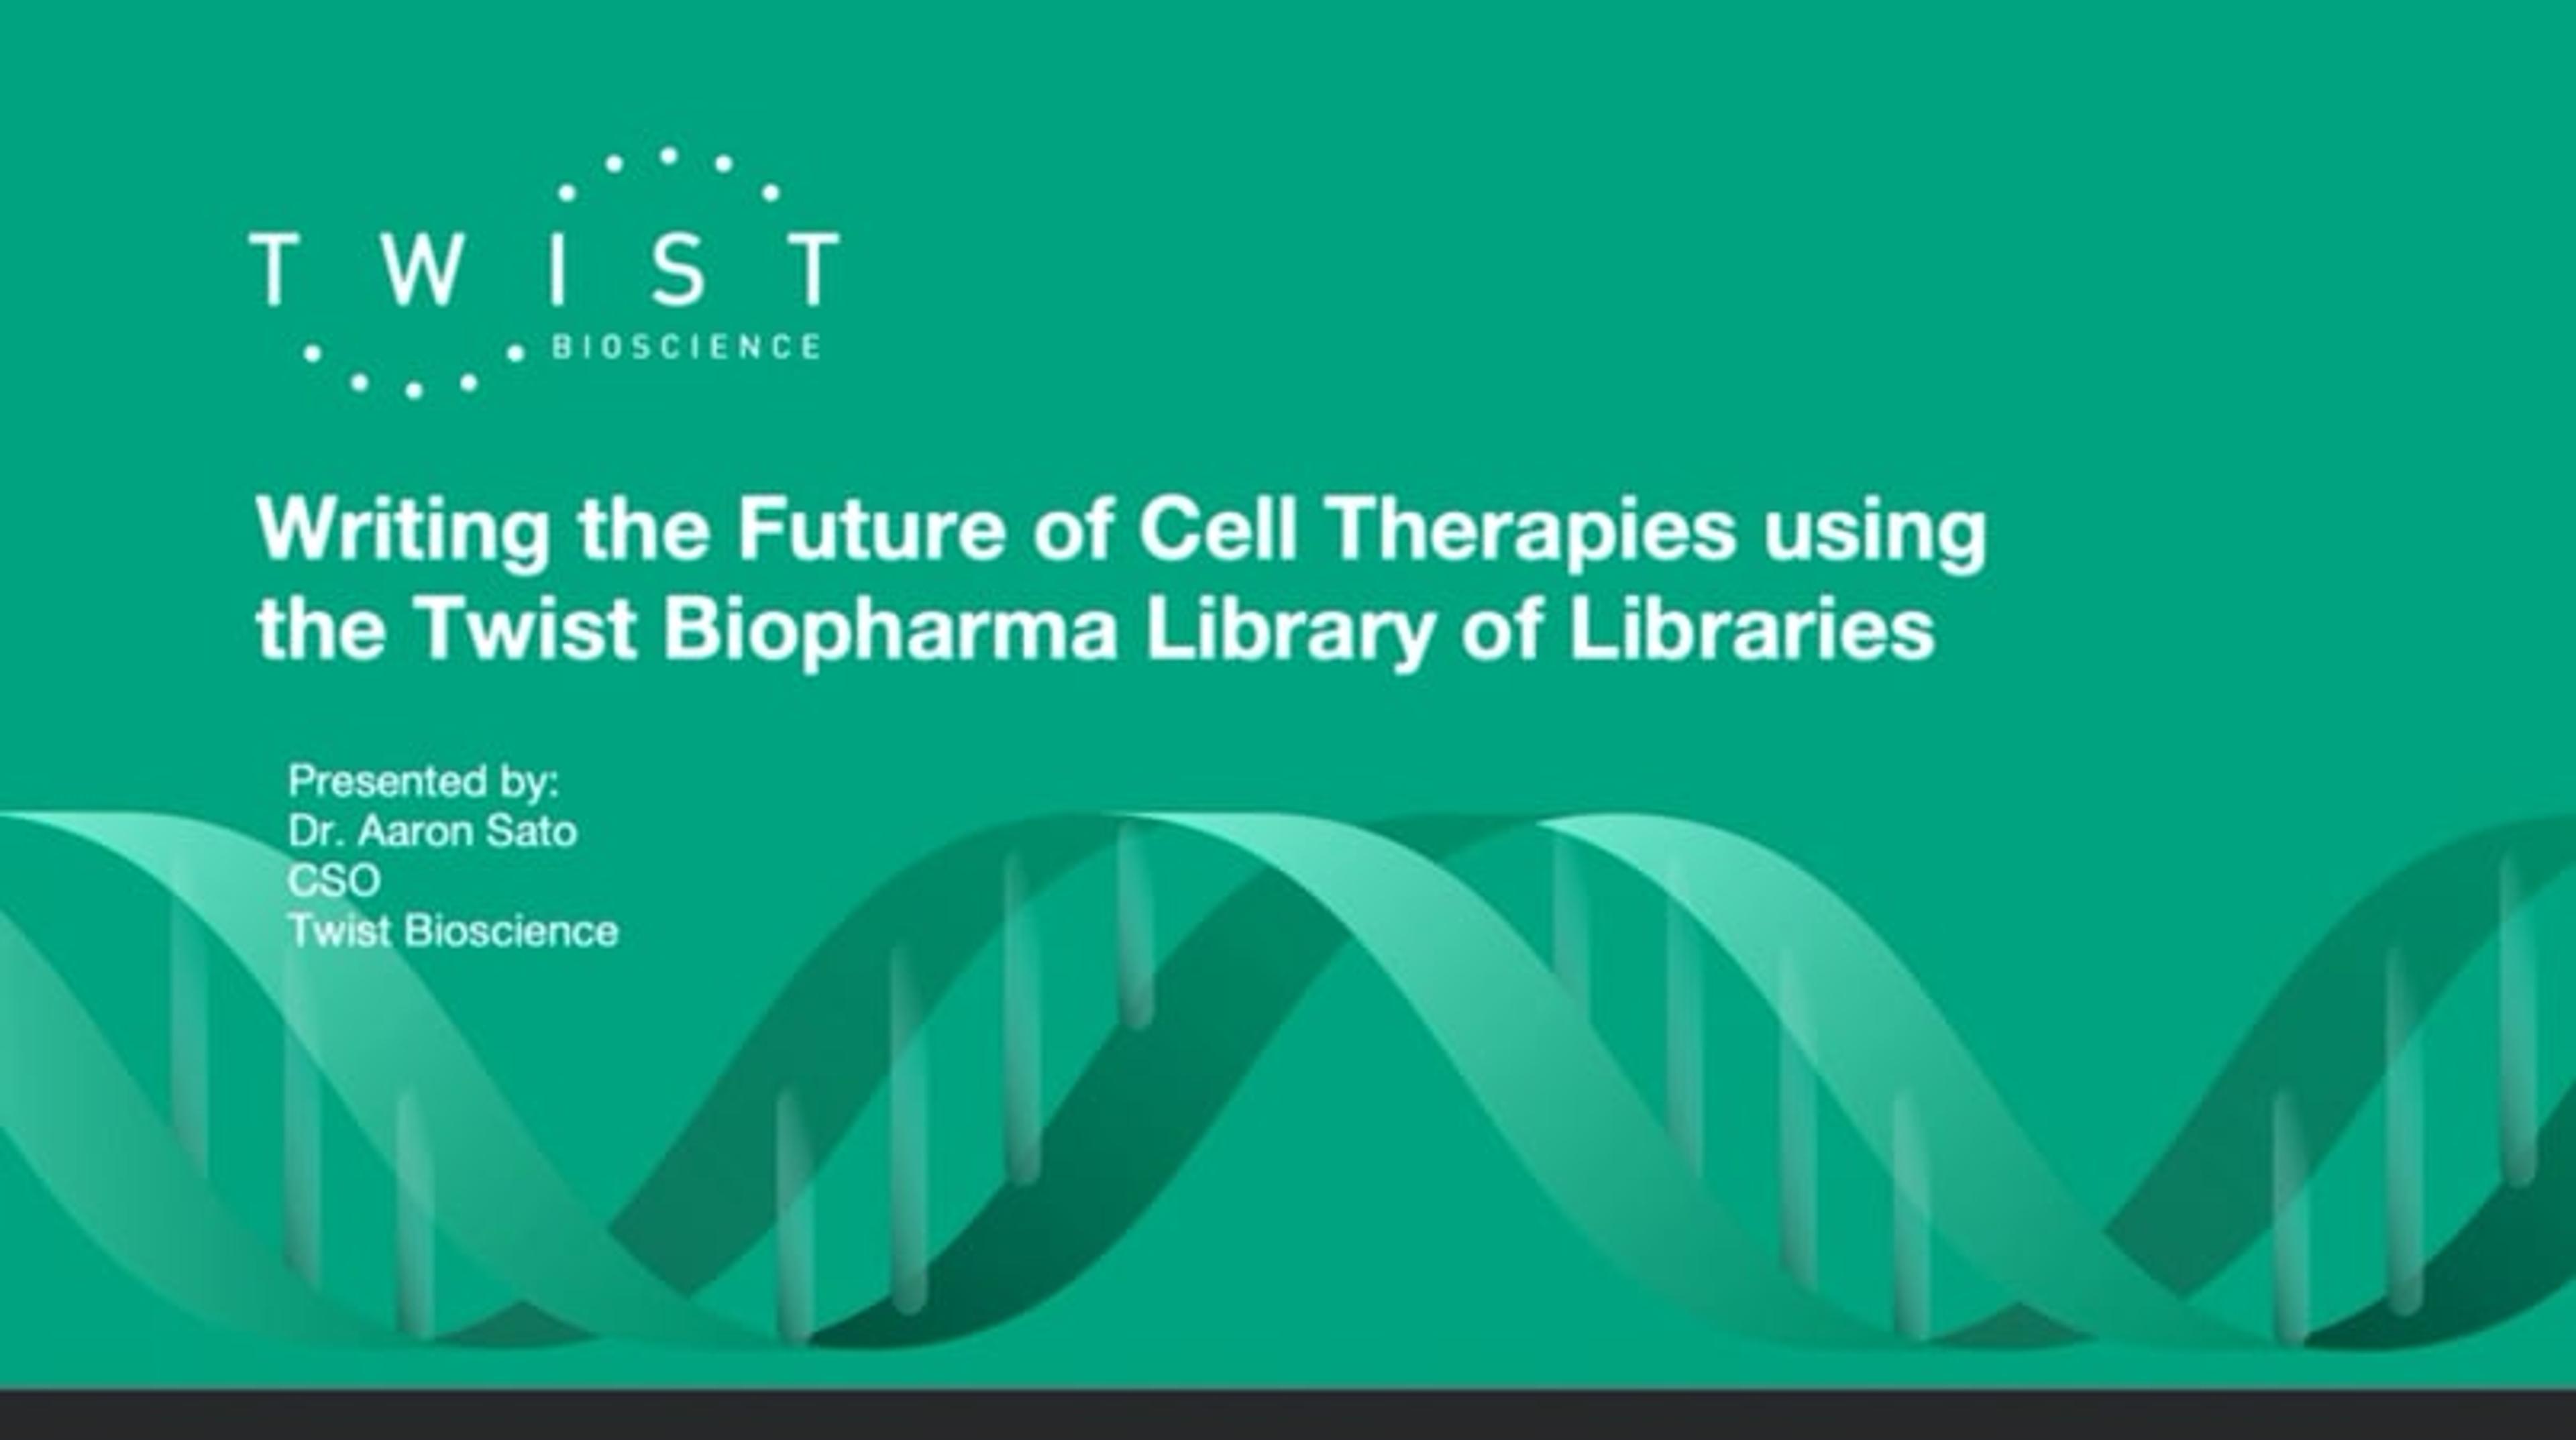 Writing the future of cell therapies